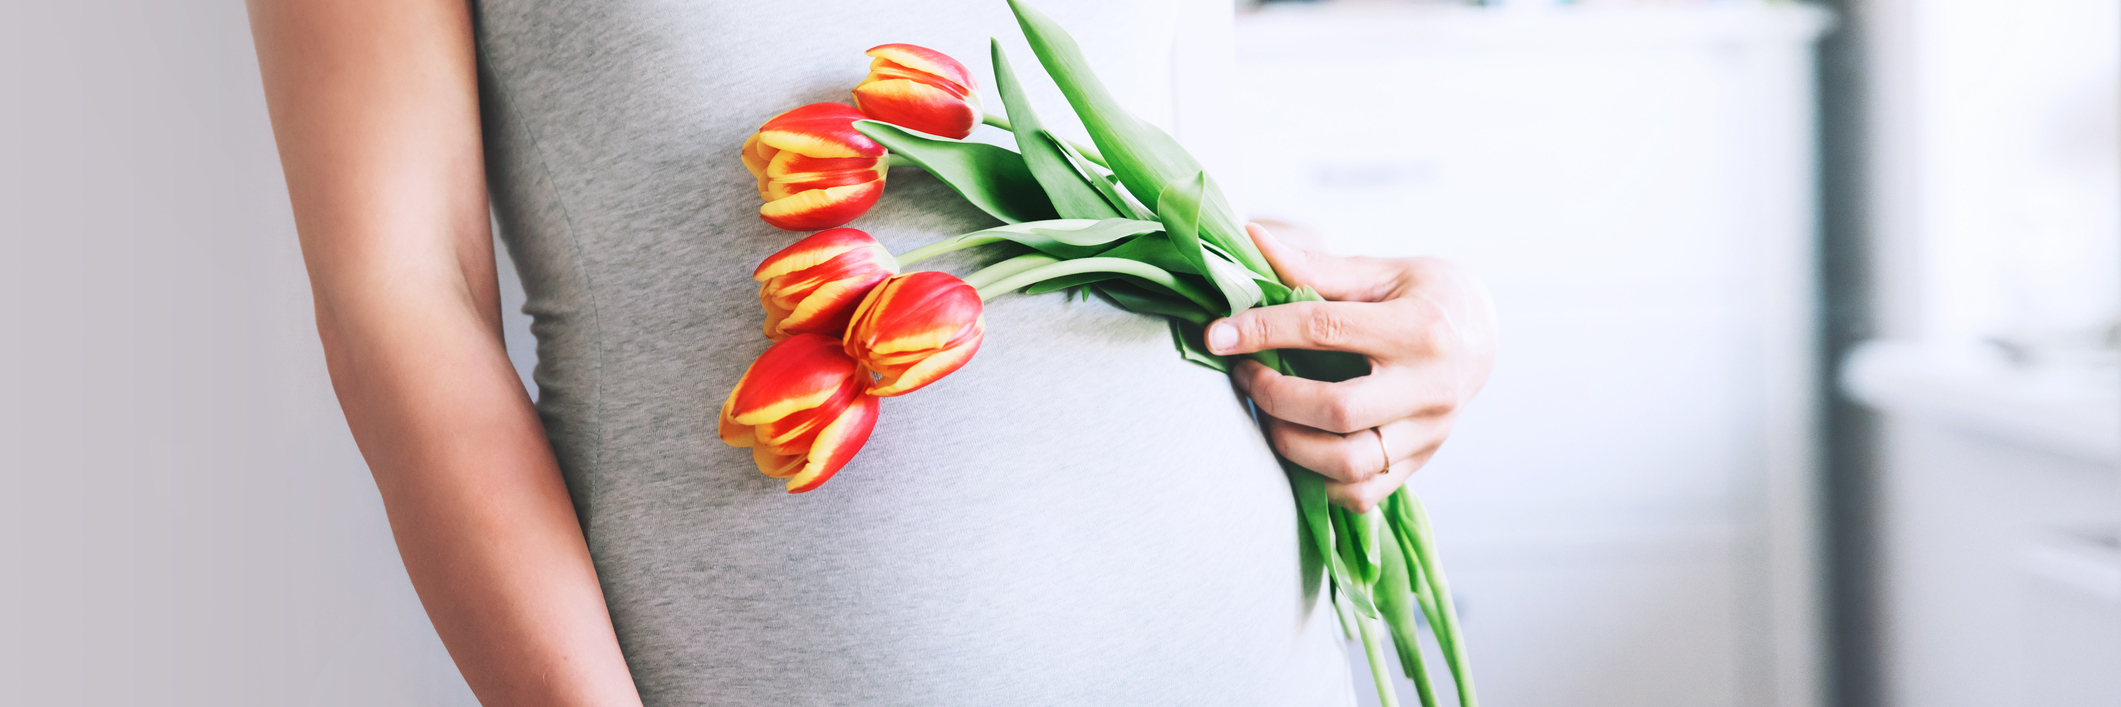 pregnant woman holding orange tulips with hands on belly